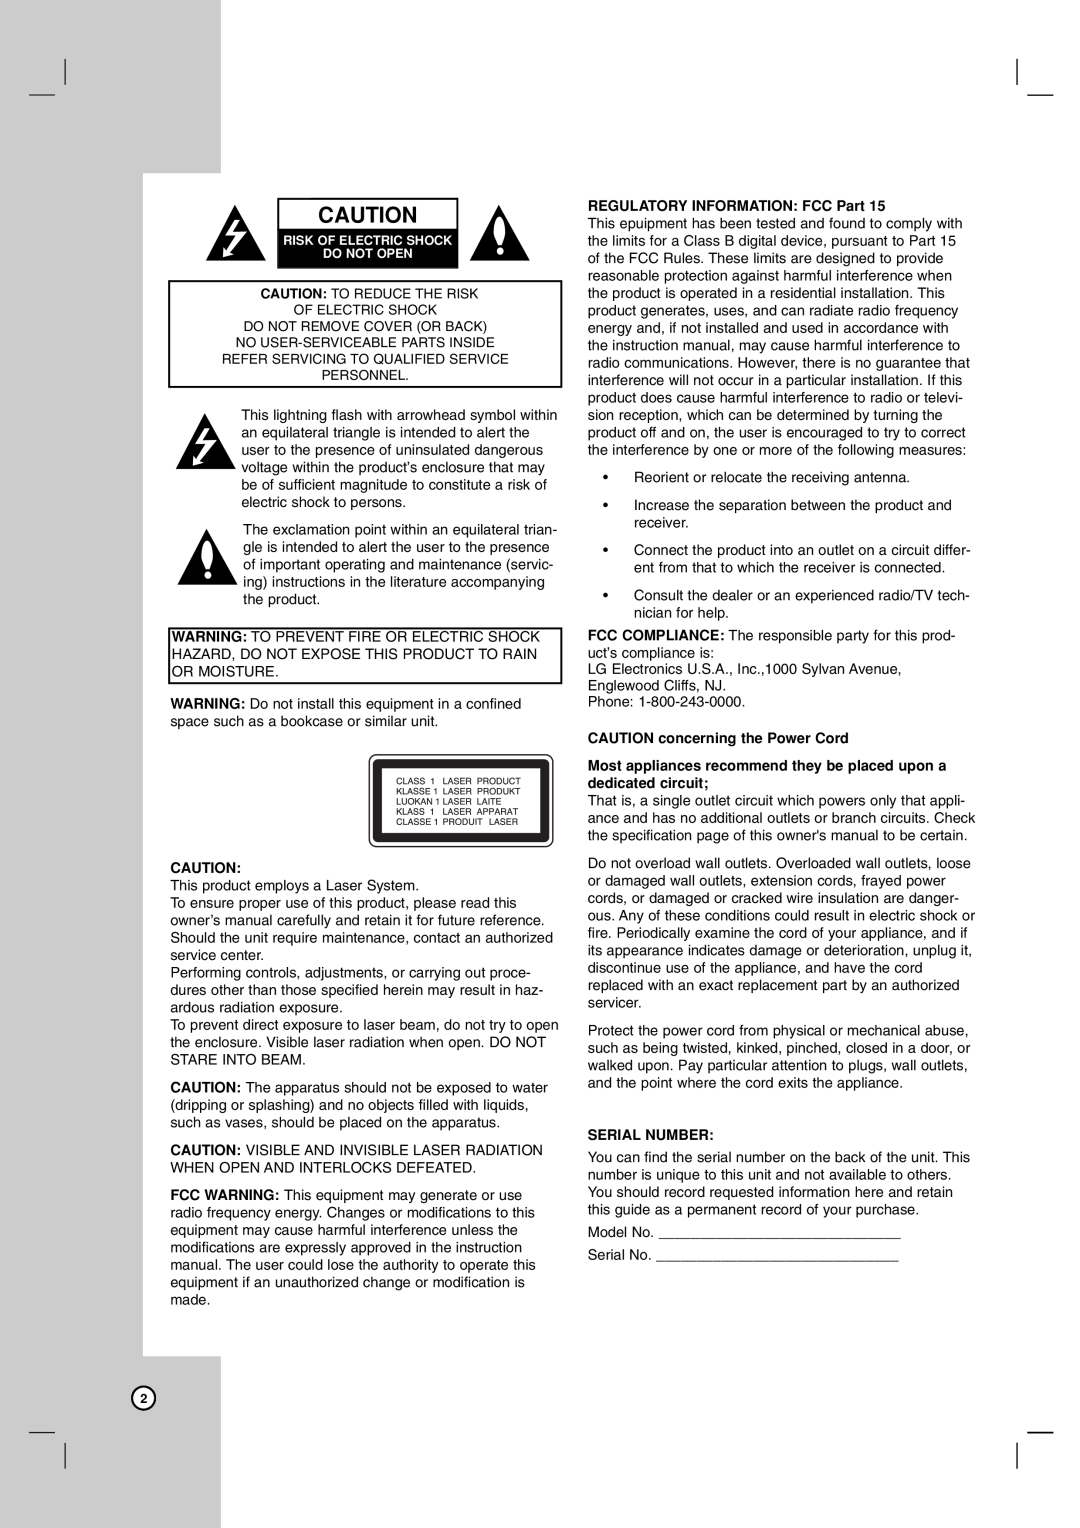 LG Electronics LDX-514 owner manual REGULATORY INFORMATION FCC Part, CAUTION concerning the Power Cord, Serial Number 